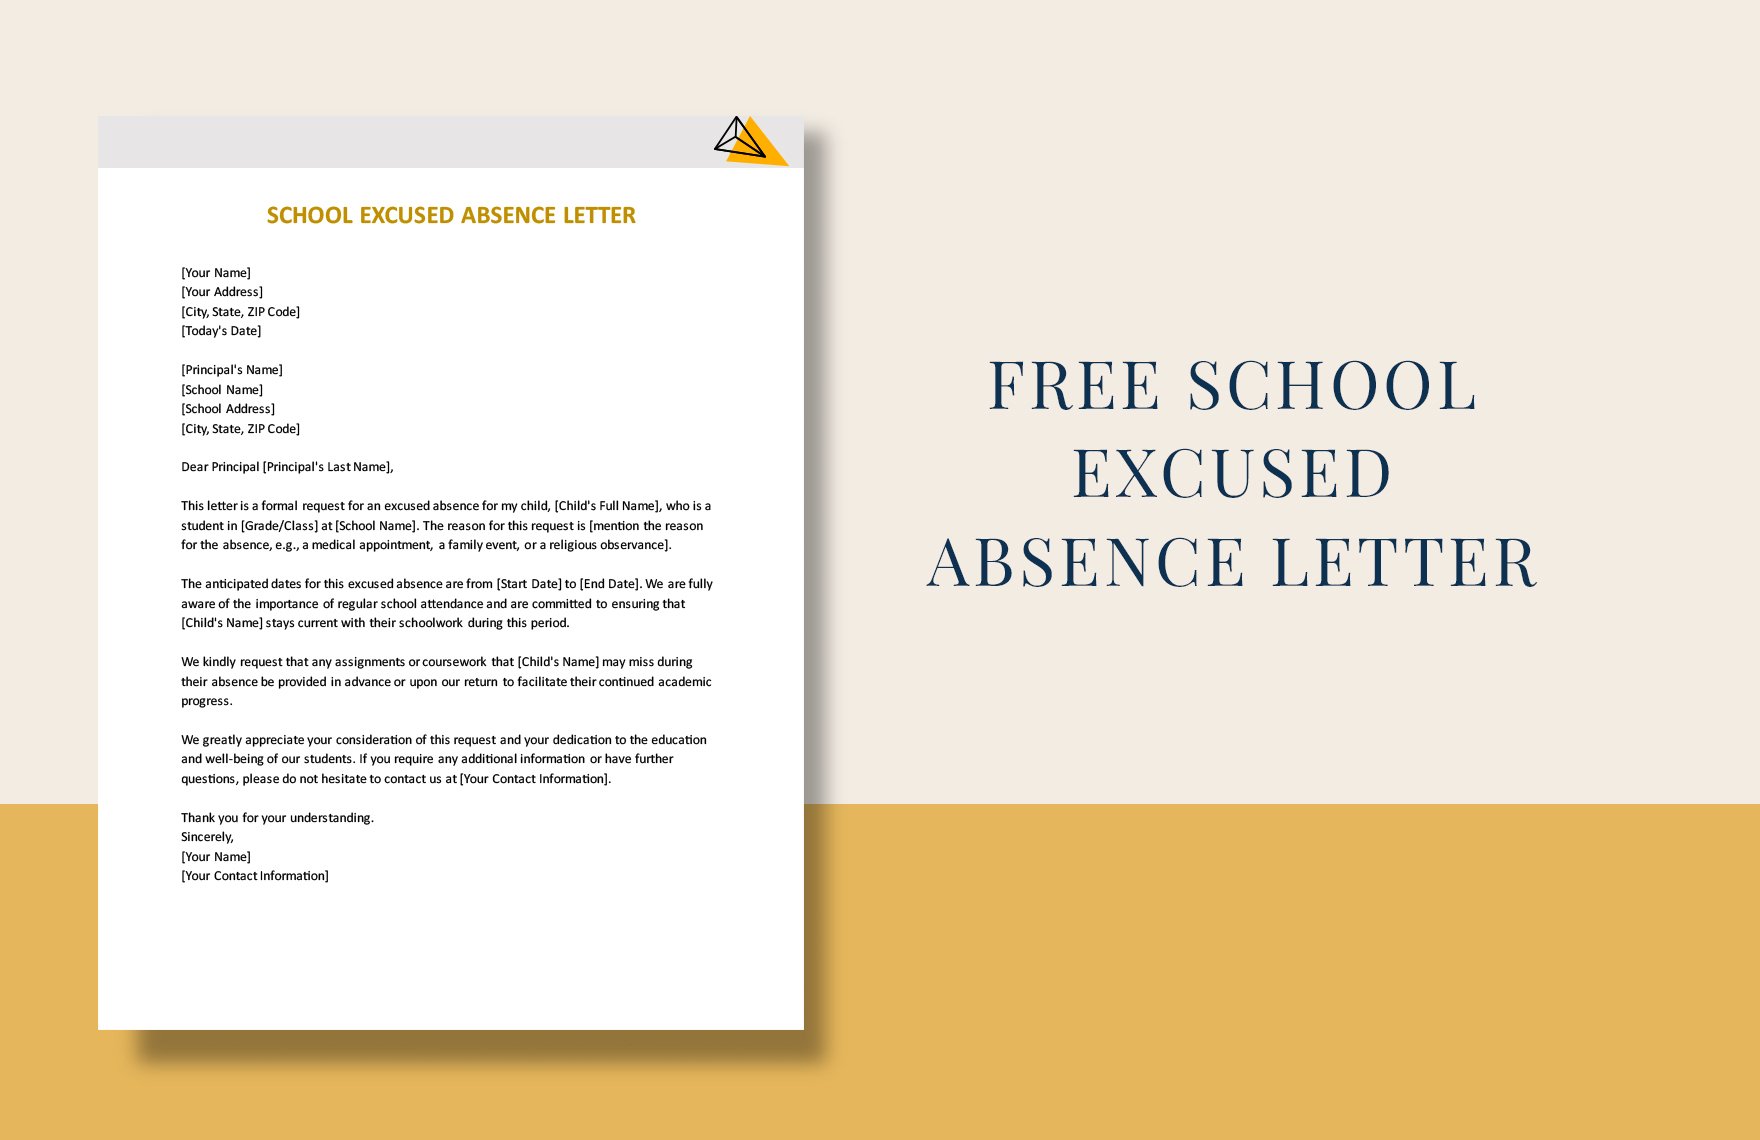 School Excused Absence Letter